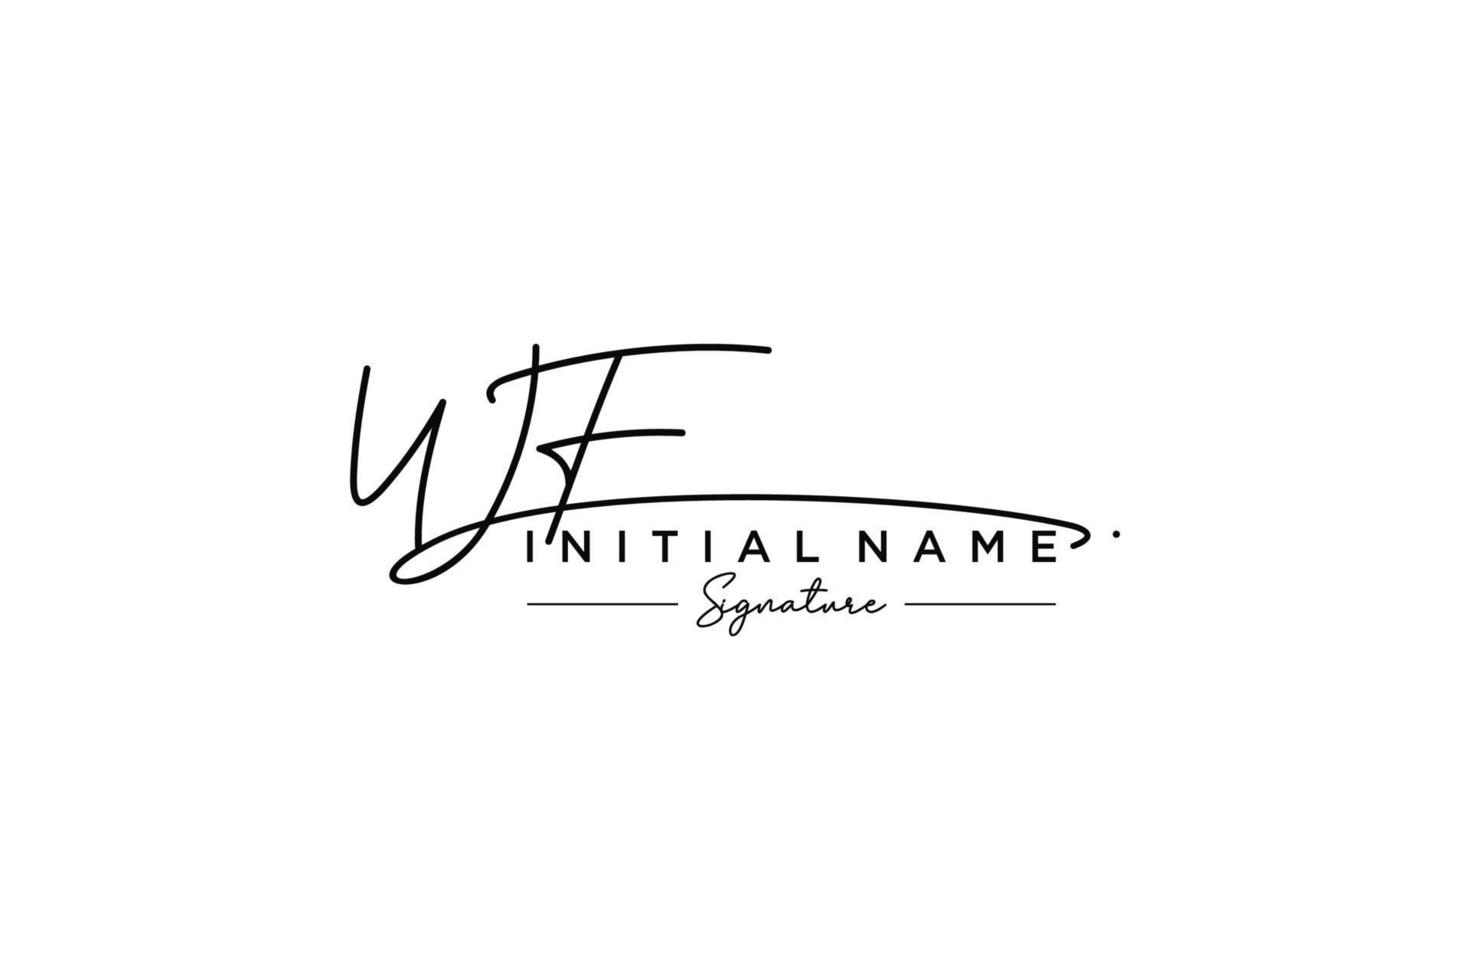 Initial WF signature logo template vector. Hand drawn Calligraphy lettering Vector illustration.